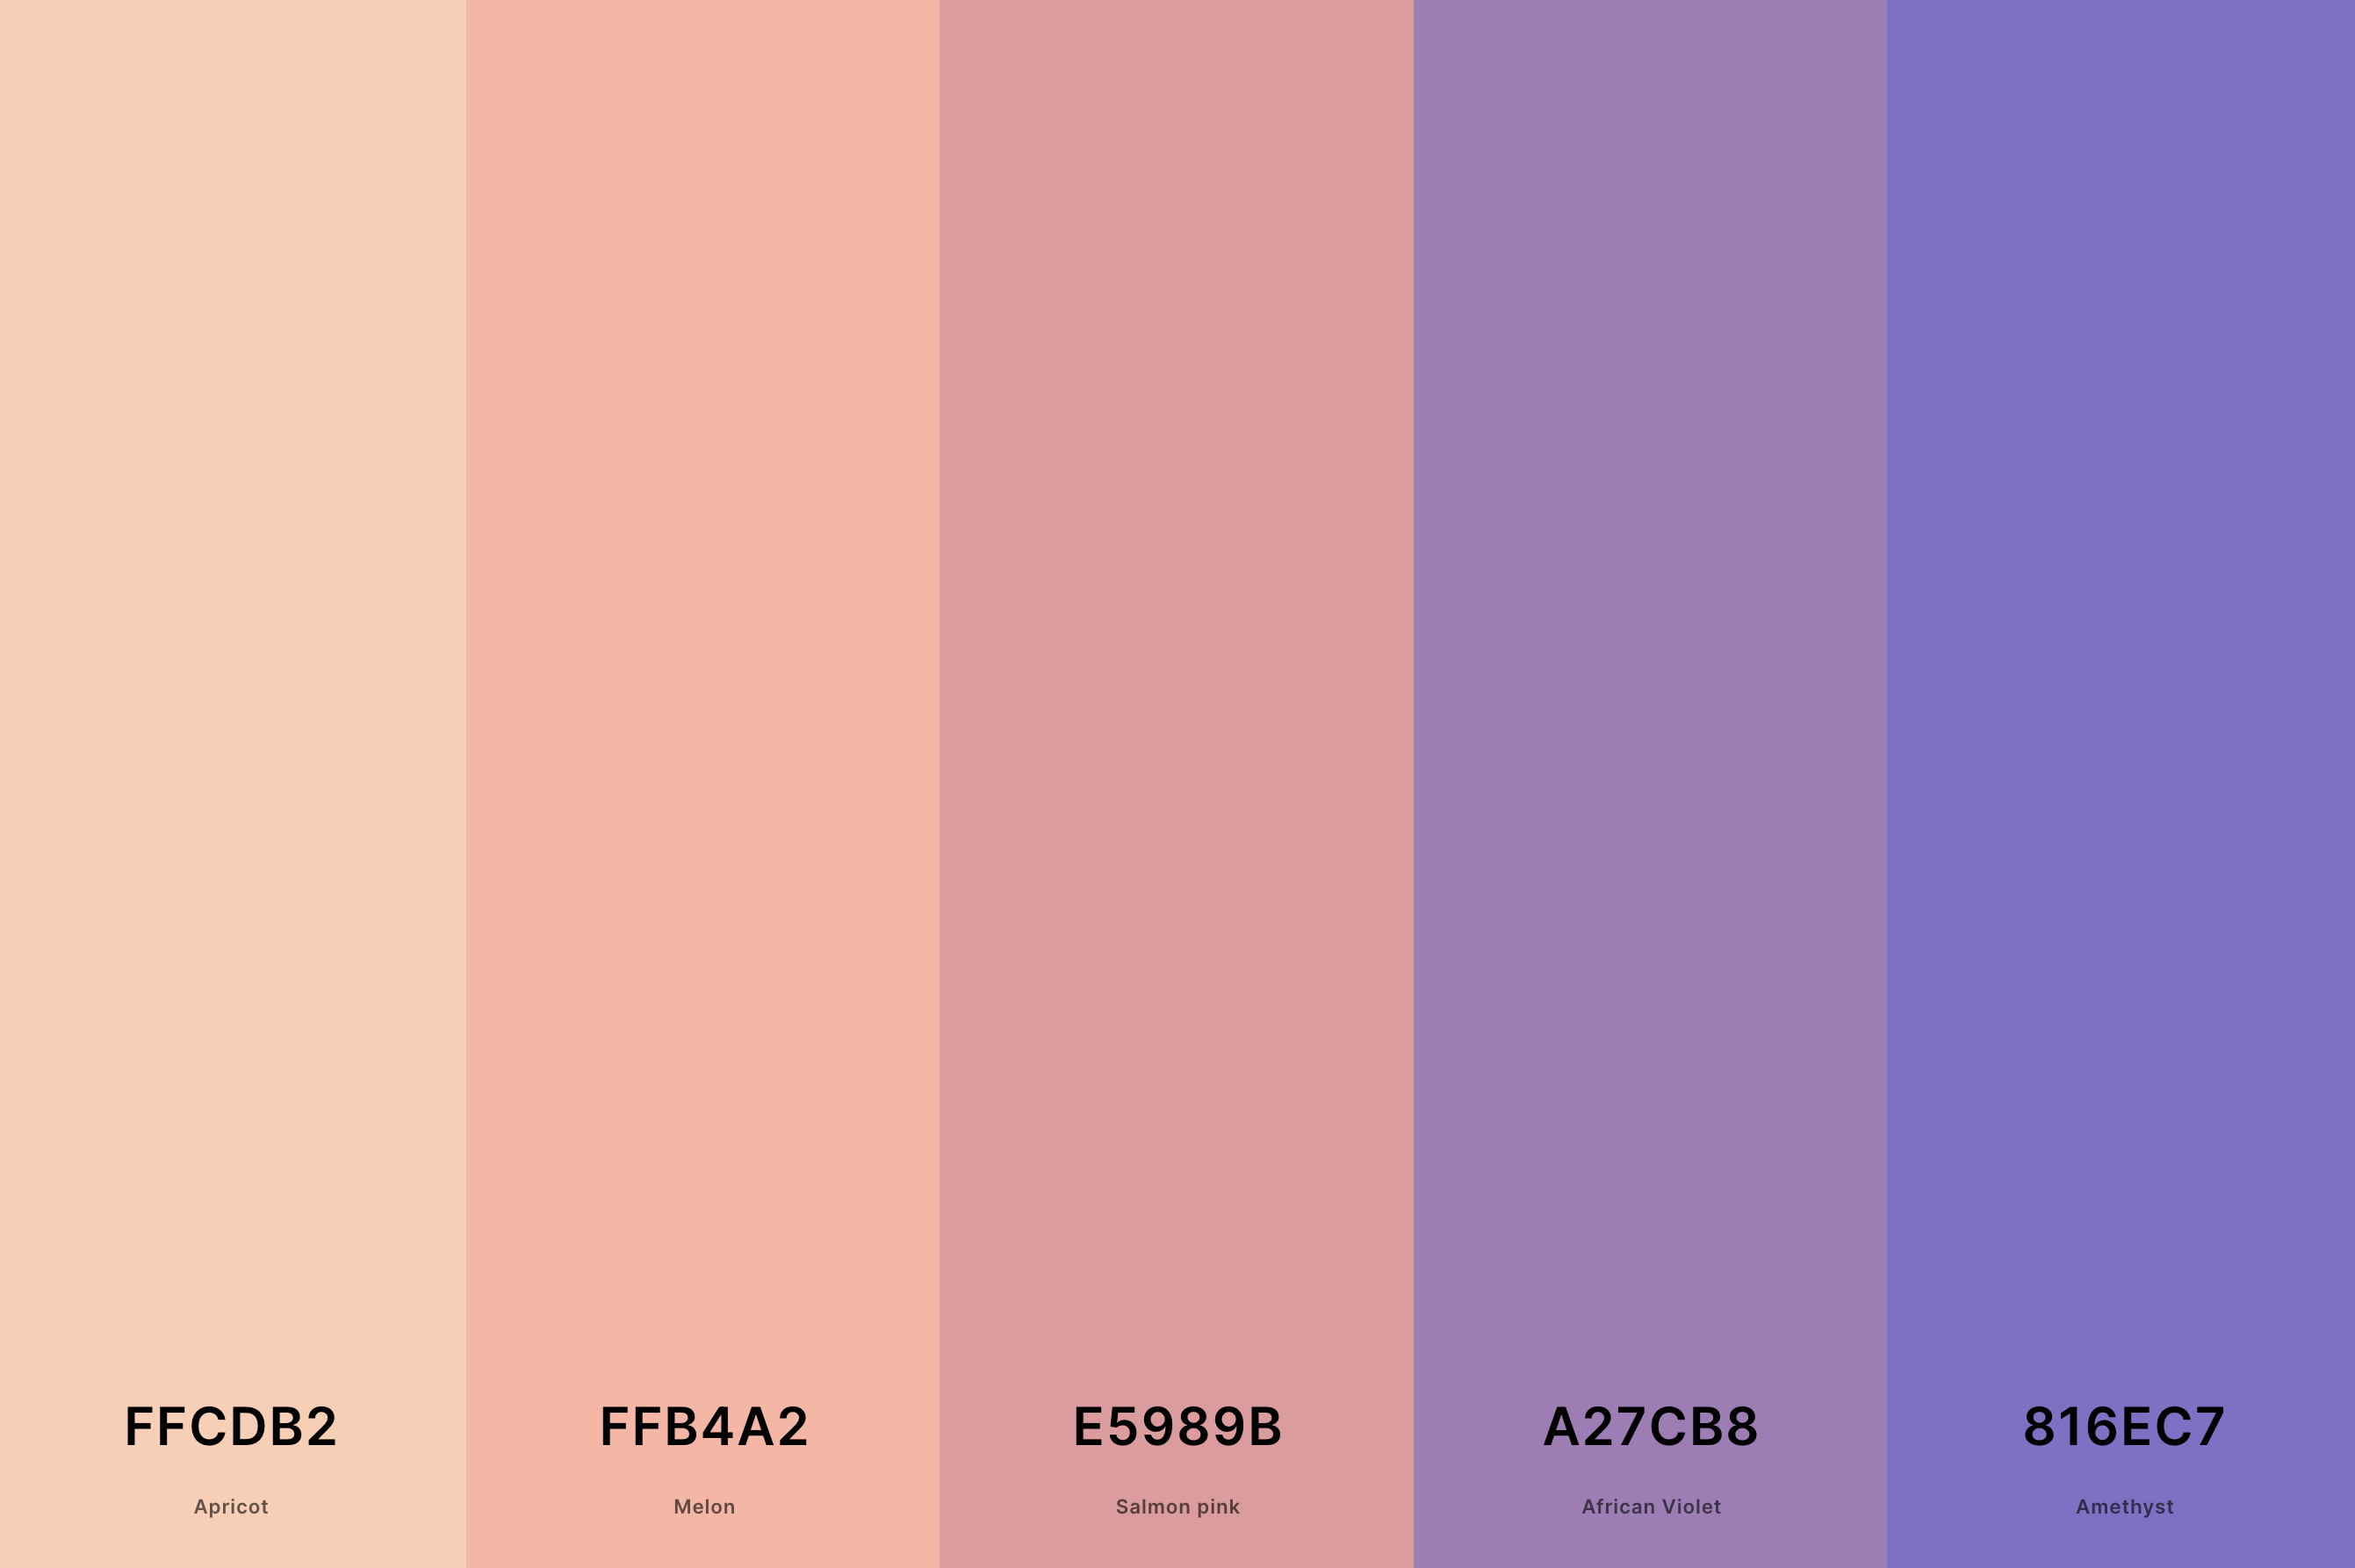 27. Aesthetic Sunset Color Palette Color Palette with Apricot (Hex #FFCDB2) + Melon (Hex #FFB4A2) + Salmon Pink (Hex #E5989B) + African Violet (Hex #A27CB8) + Amethyst (Hex #816EC7) Color Palette with Hex Codes